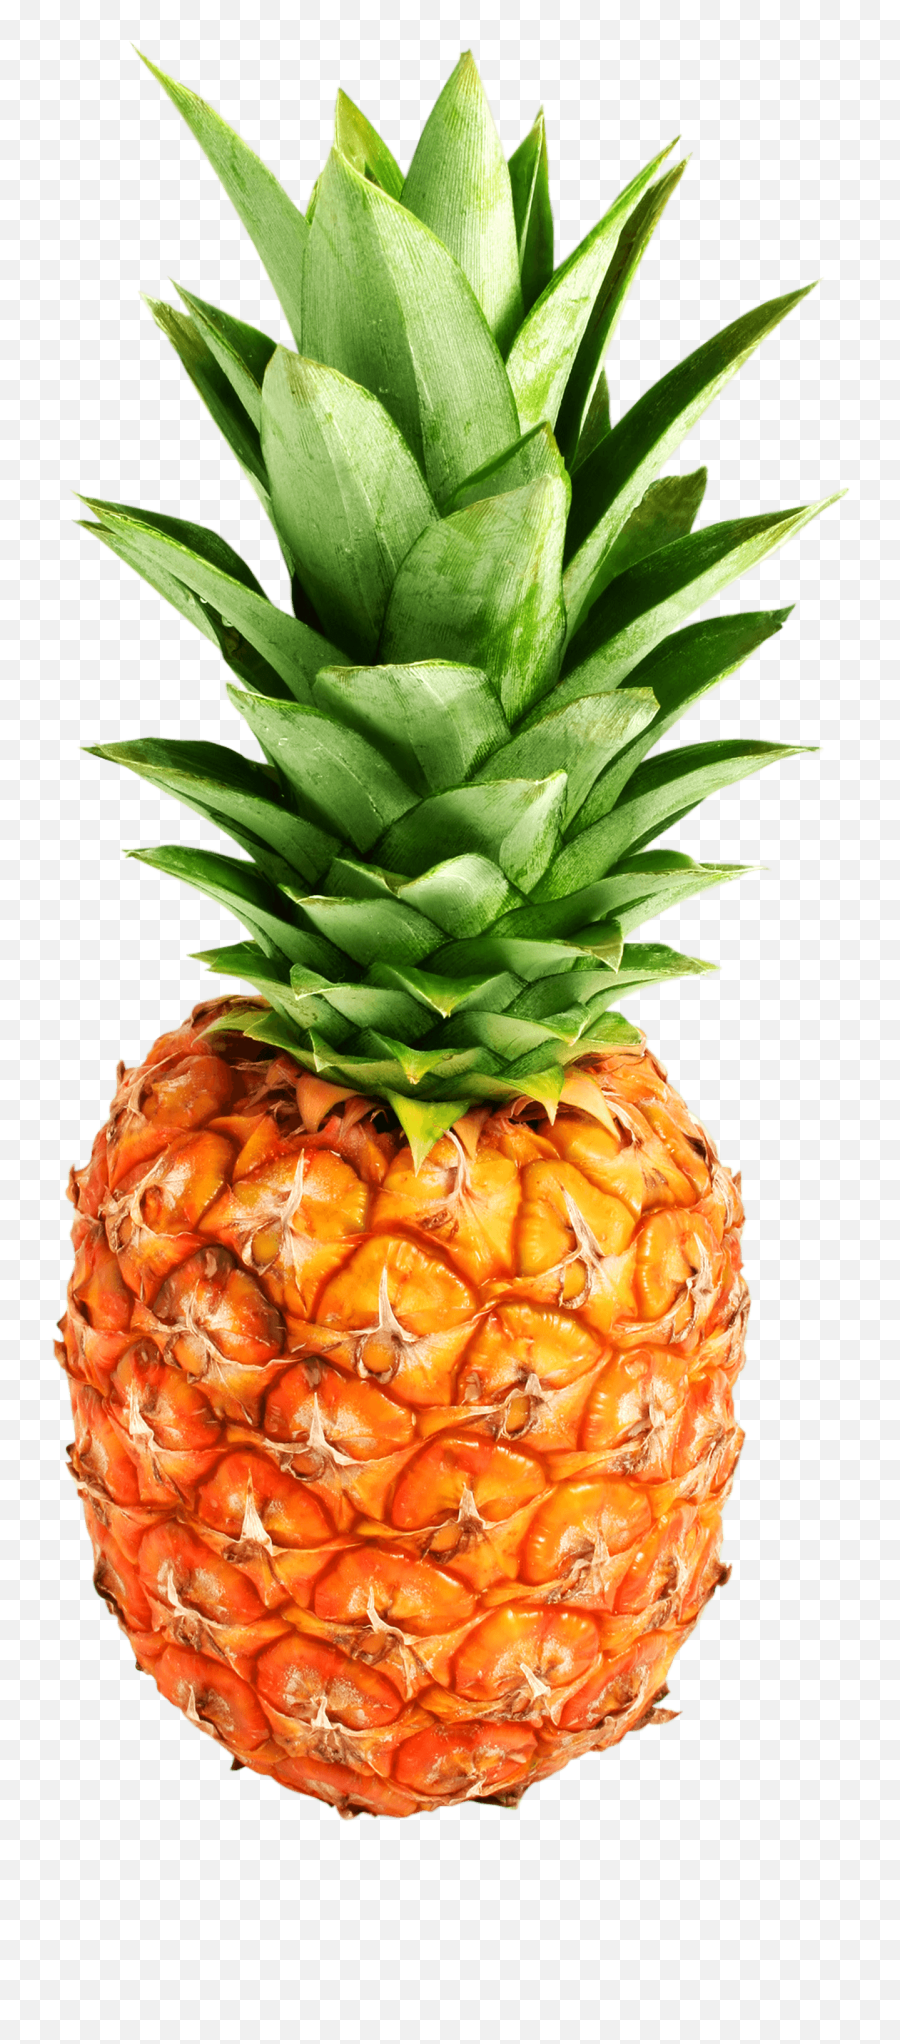 Pineapple Png Transparent Photo - Pineapple Transparent Background,Pineapple Transparent